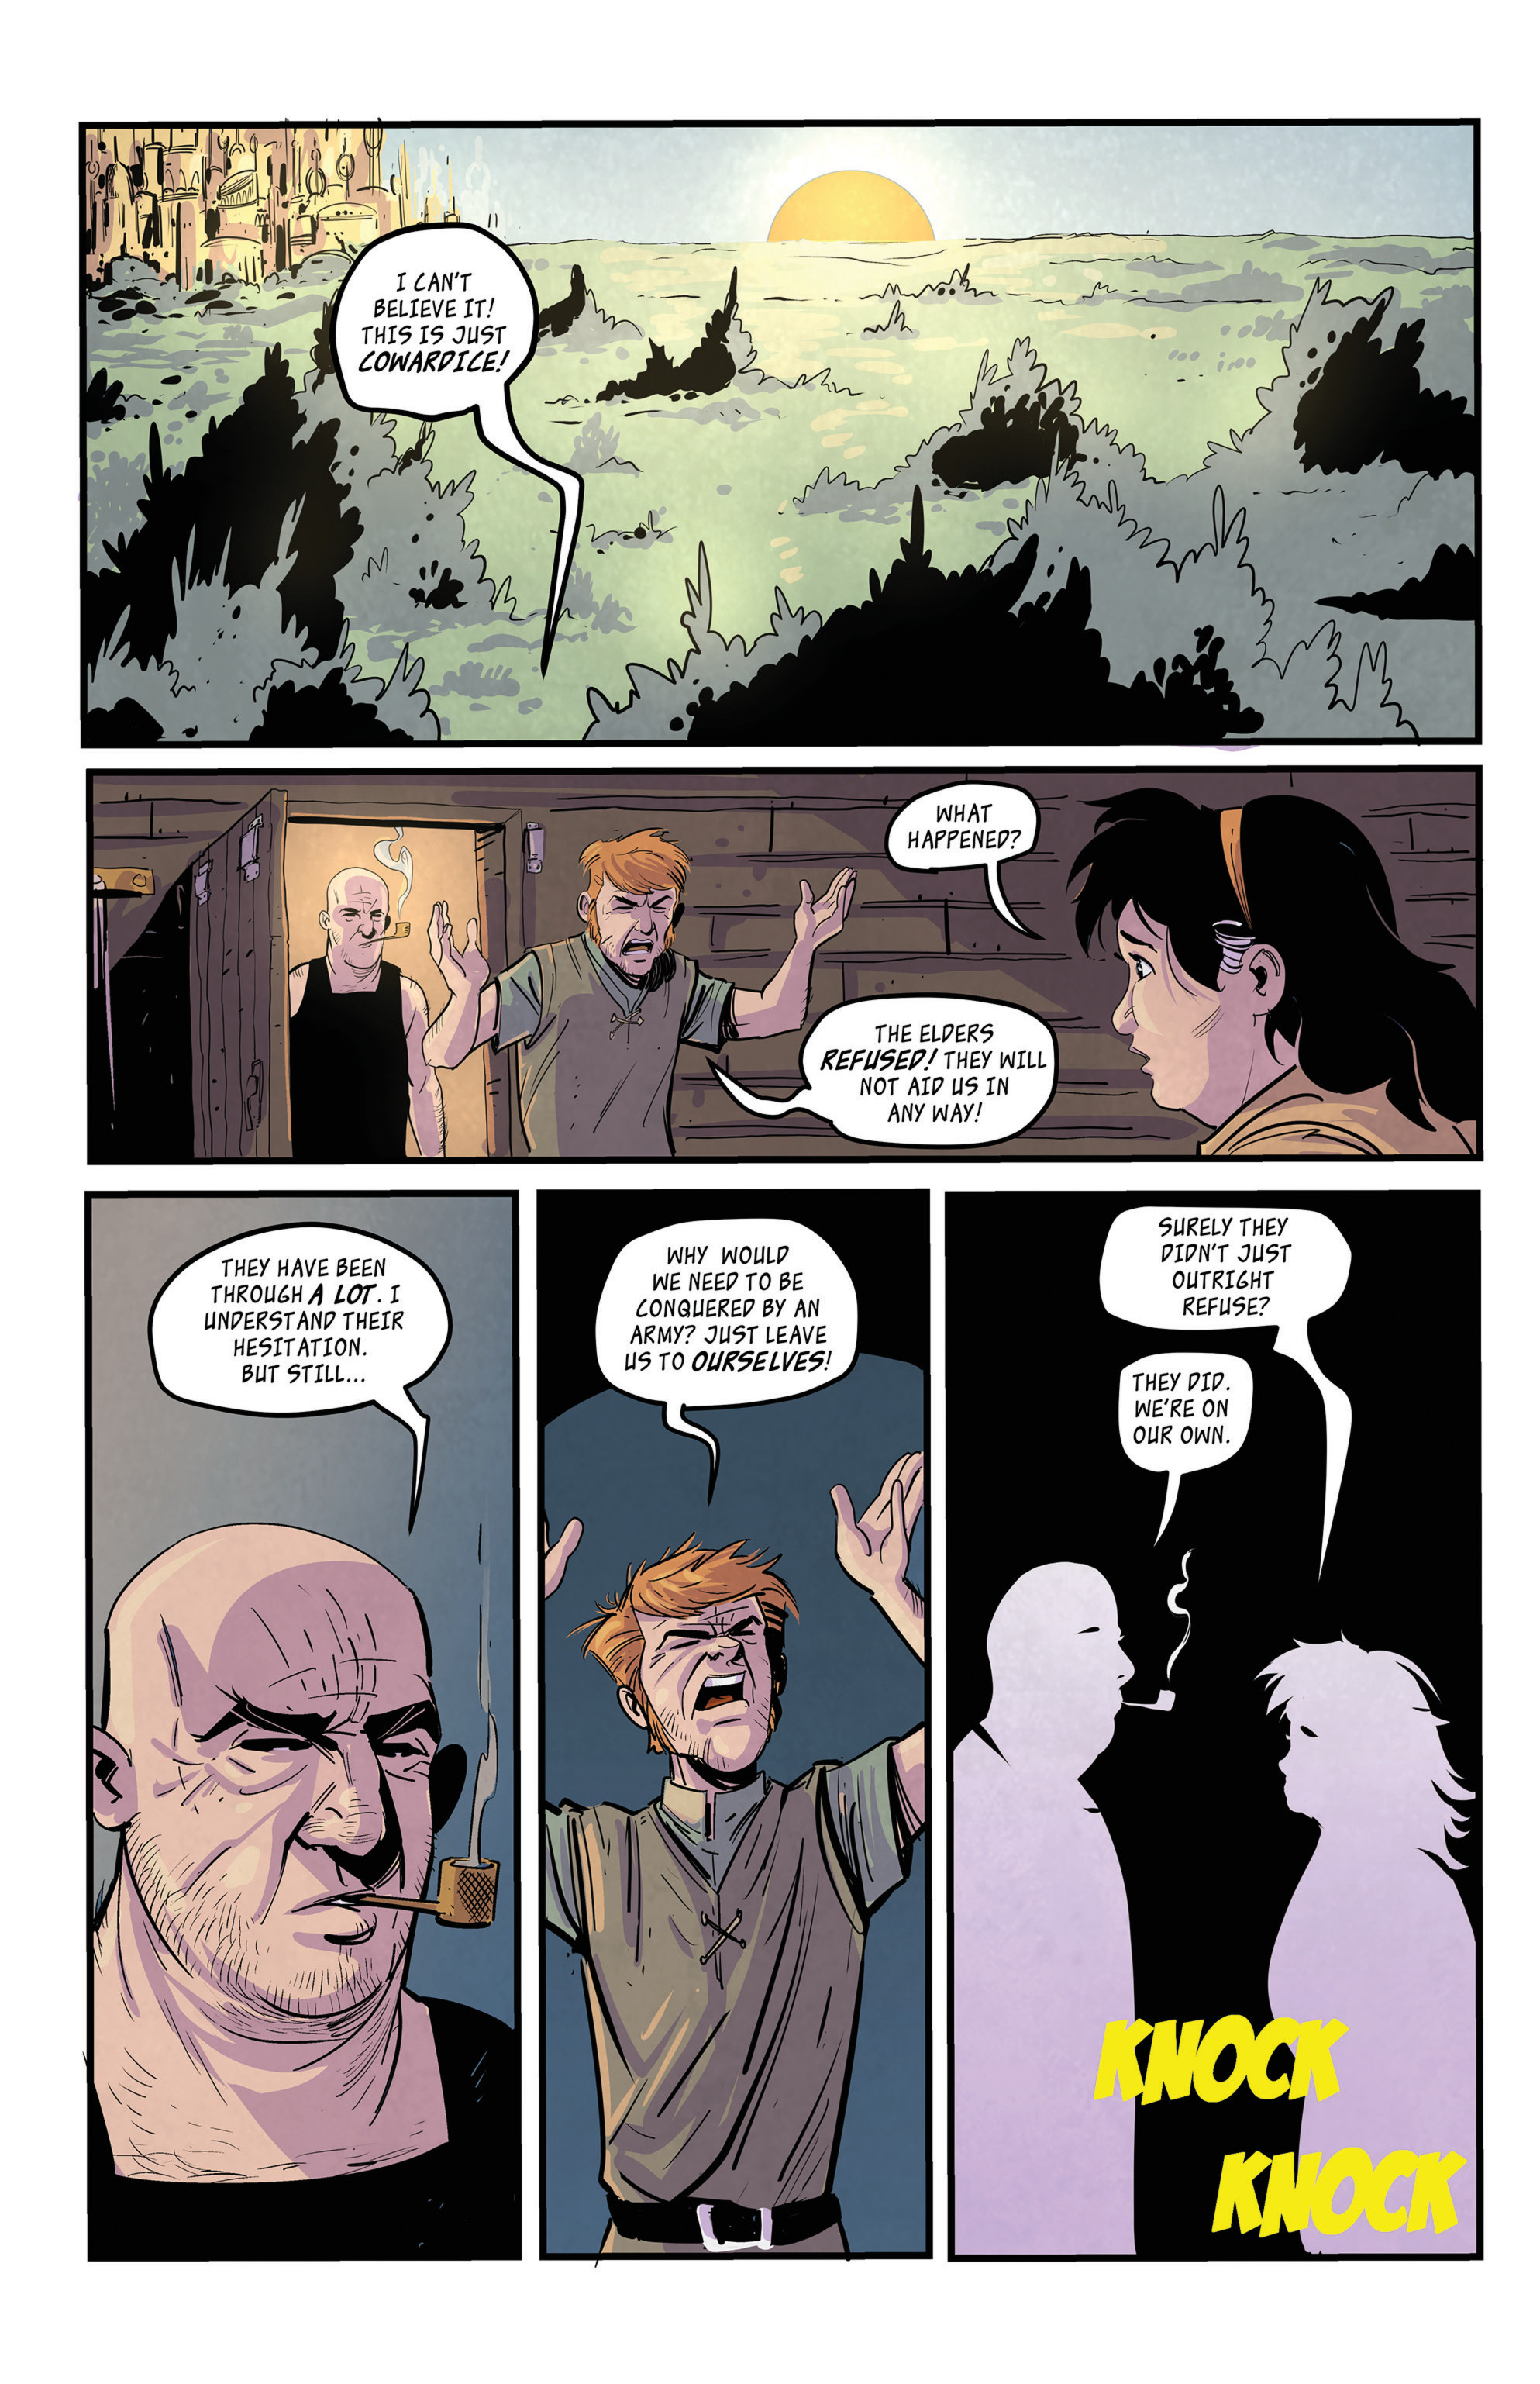 William the Last: Shadow of the Crown Vol. 3 (2019-): Chapter 2 - Page 3